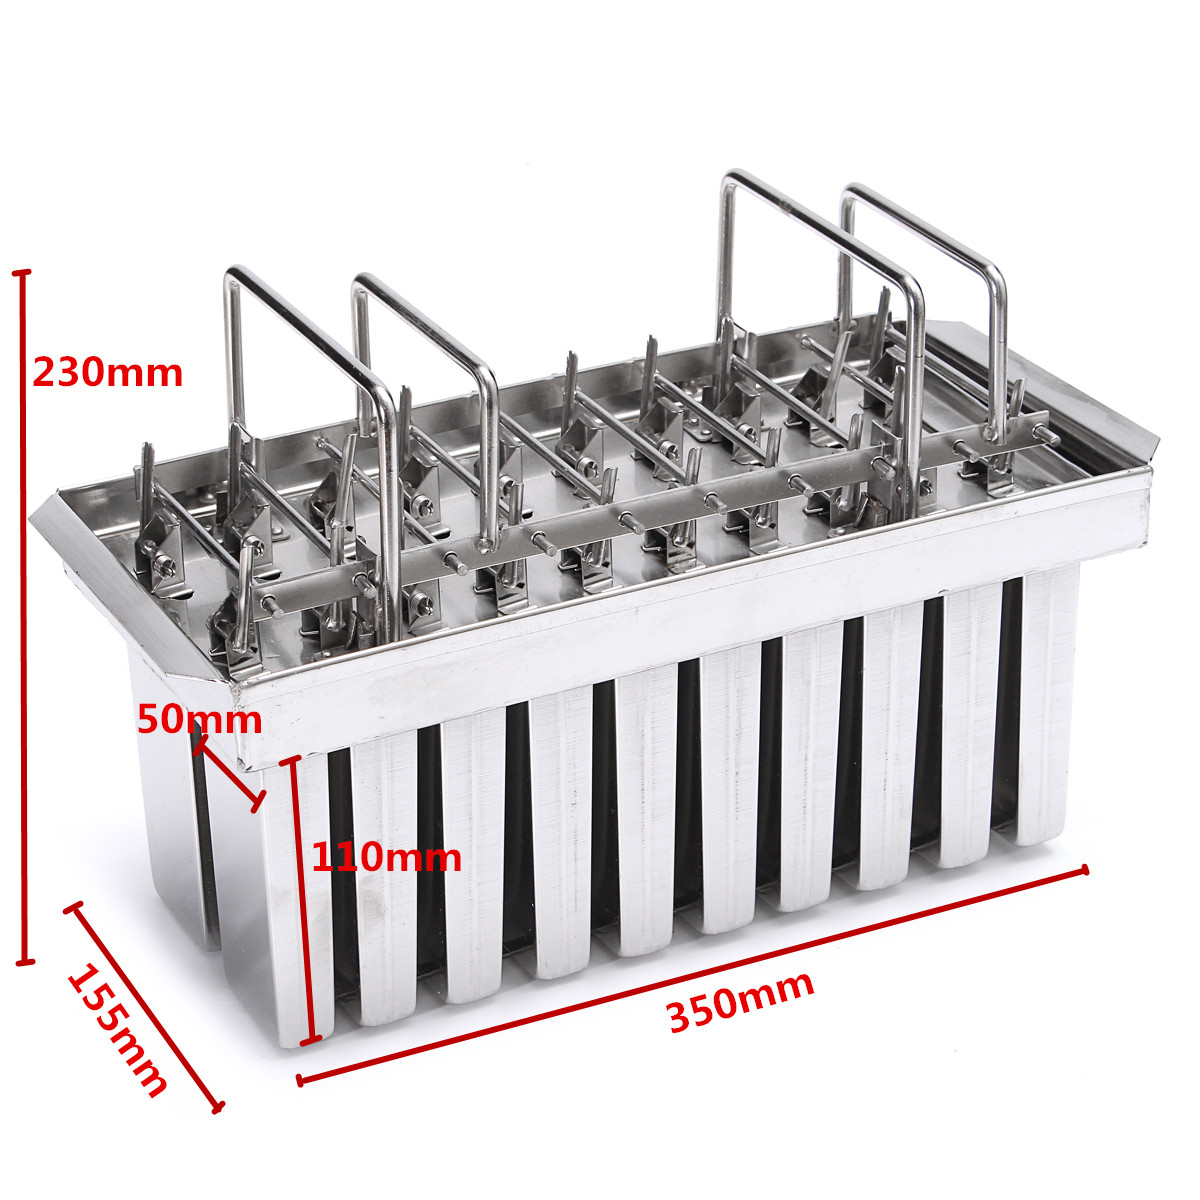 Stainless-Steel-Mould-20-Cavity-115g-Ice-Pop-Maker-Mold-Lolly-Popsicle-Square-Ice-Cream-Stick-Holder-1339666